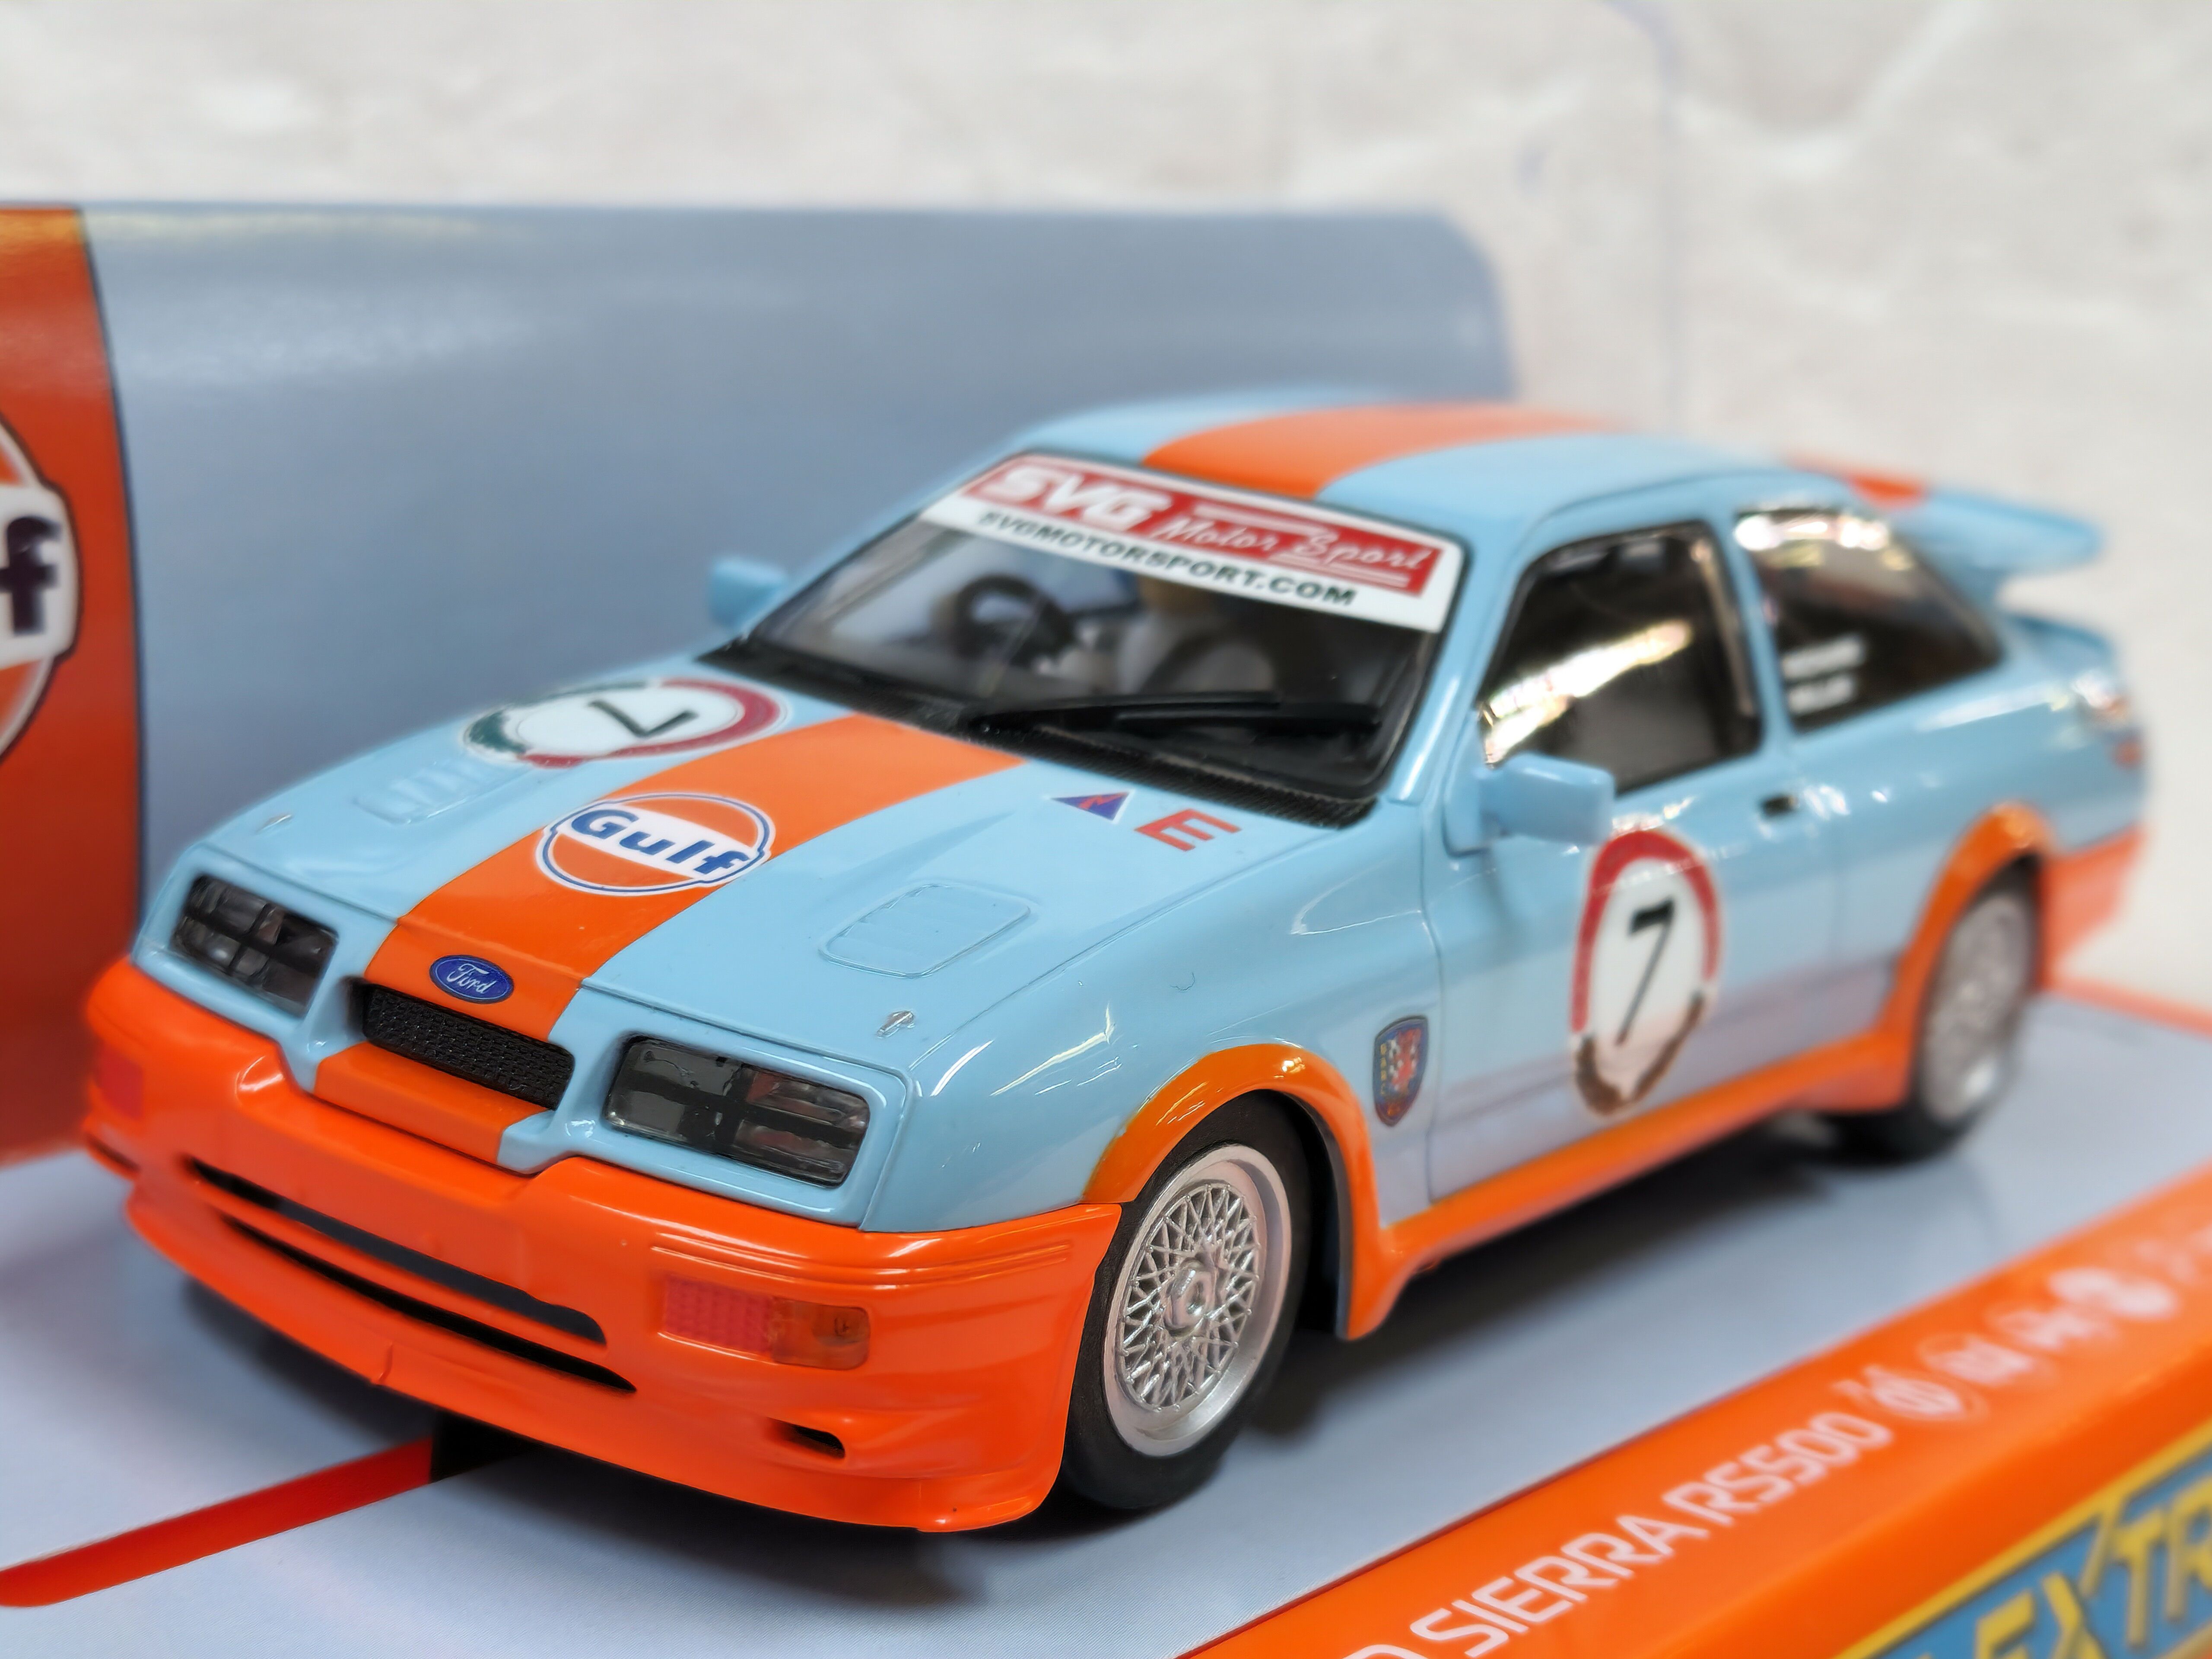 C4034 Scalextric Ford GT GTE Gulf Edition, #19 1:32 Slot Car *DPR* - Great  Traditions